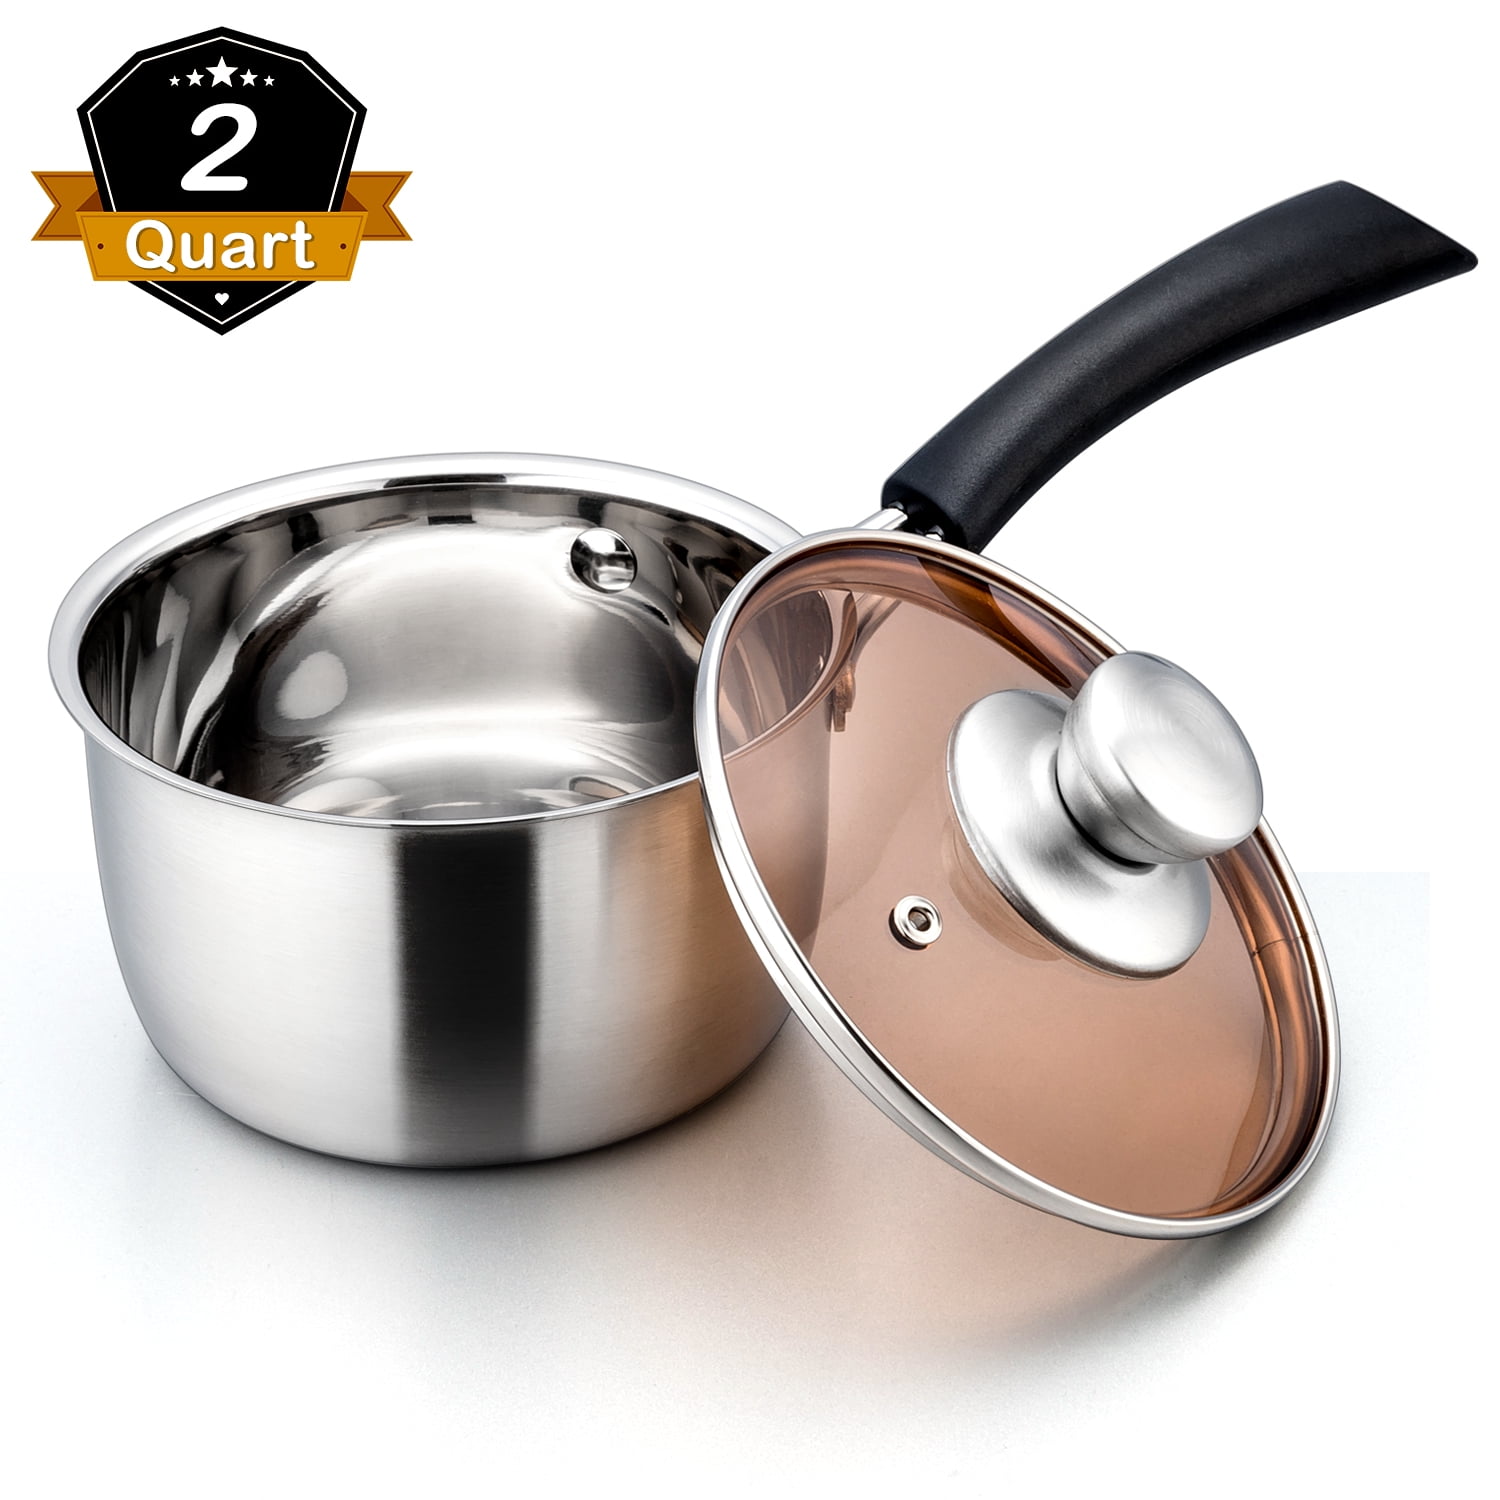 2QT Saucepan With Lid 2 Quart Stainless Steel Small Pot Soup Milk Pan Home  Kitch